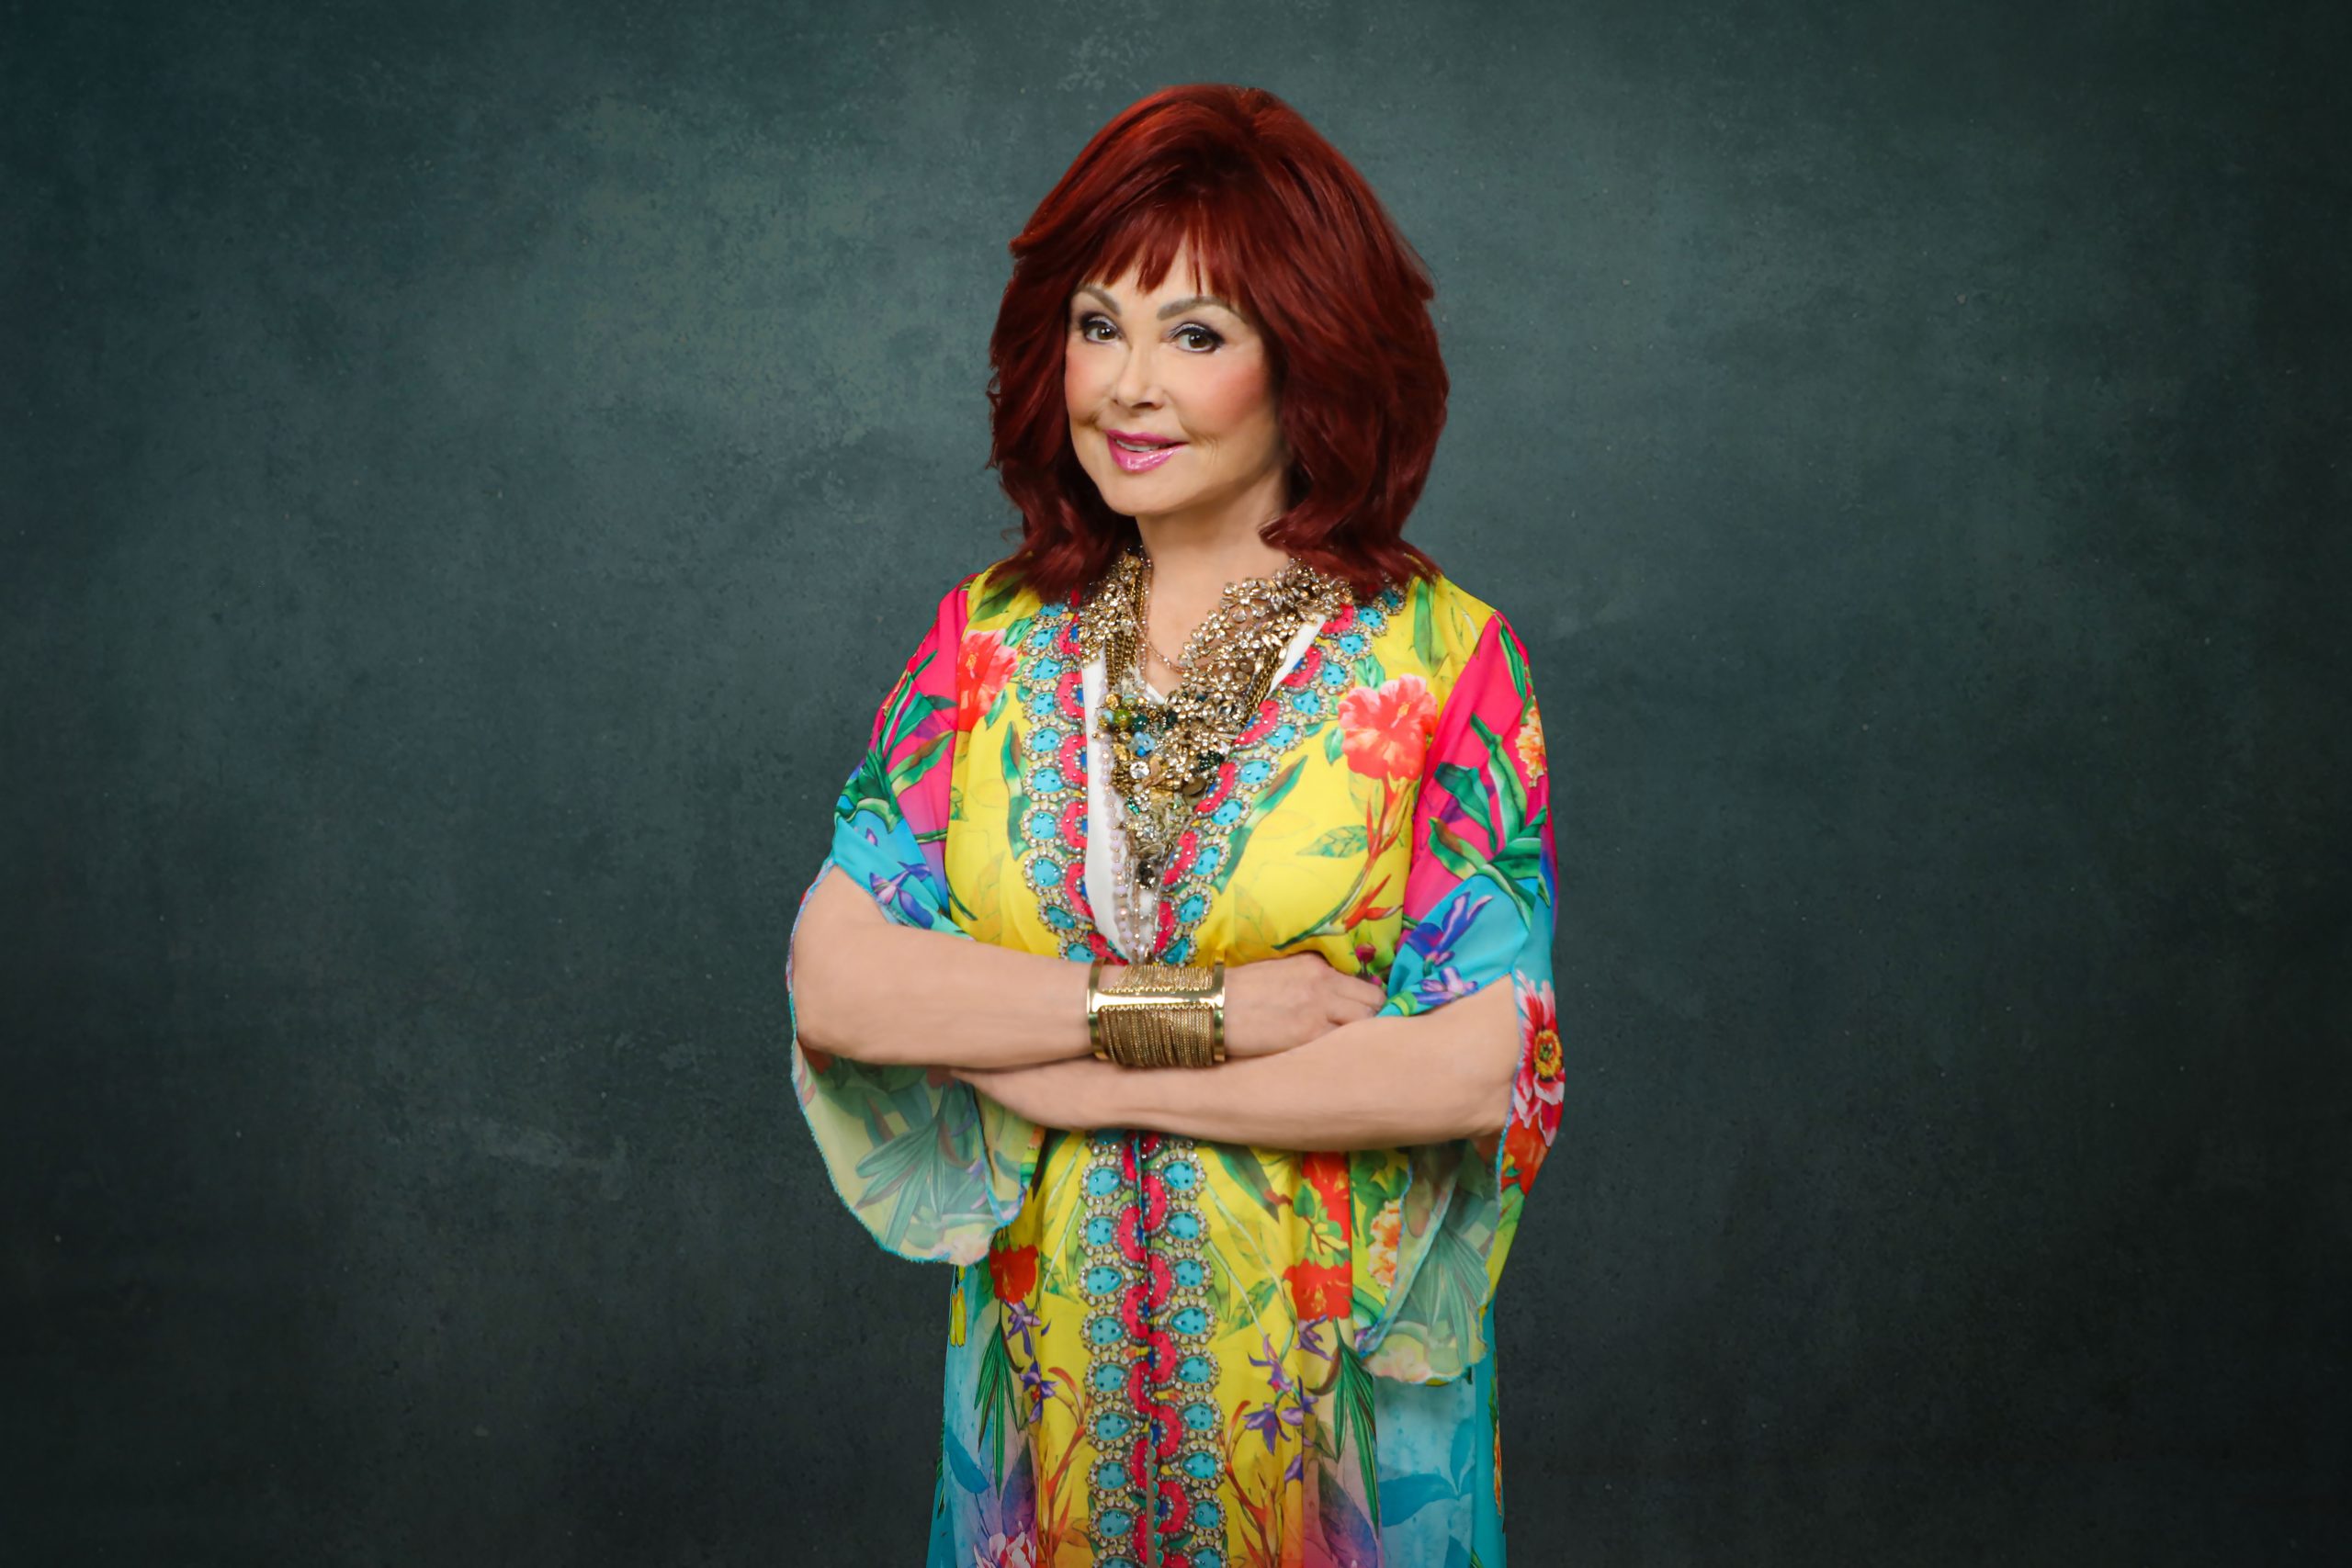 angelo argarin recommends pictures of naomi judd pic